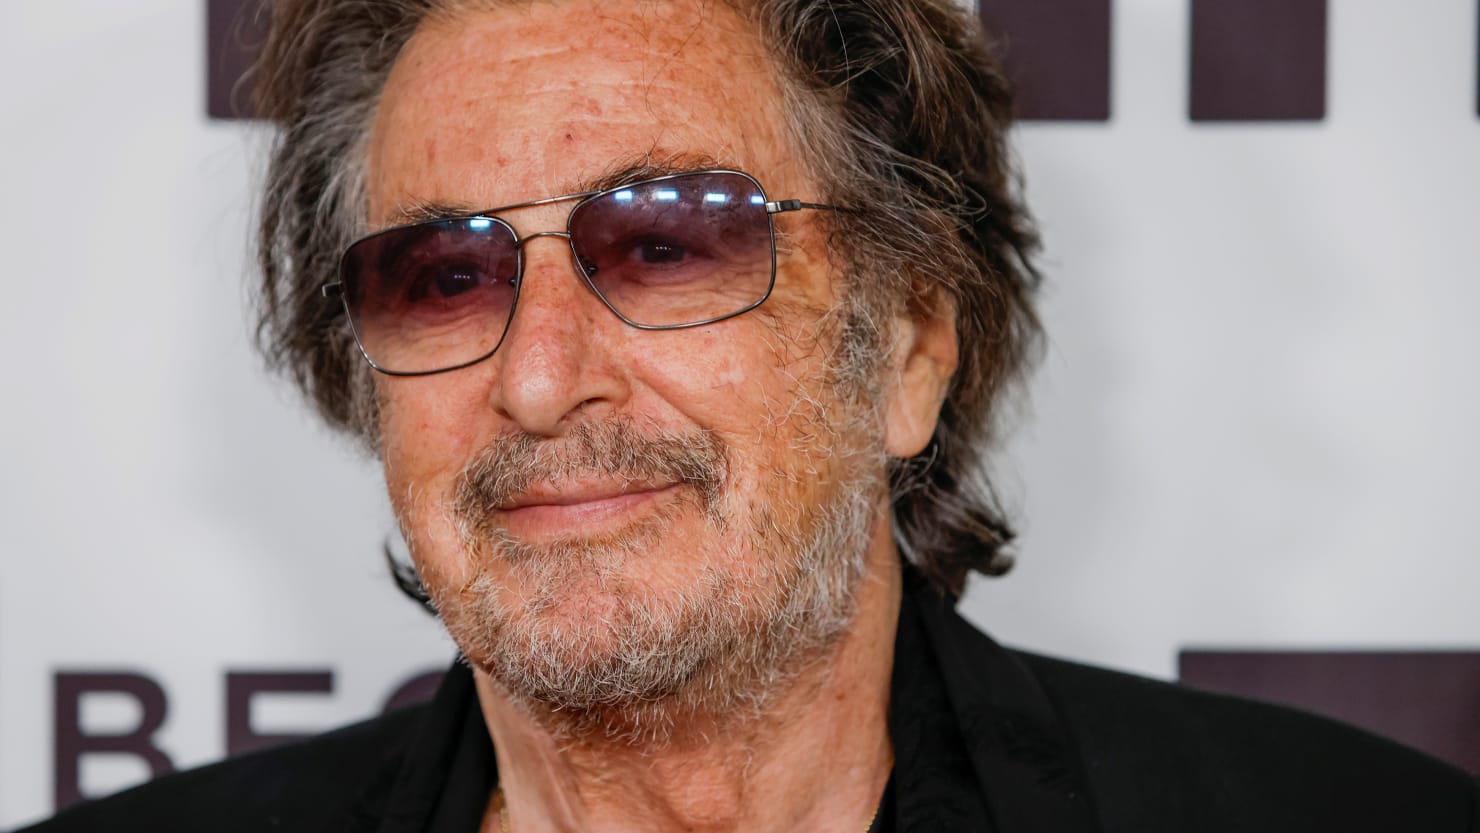 Al Pacino, 82, Is Having a Baby with His 29-Year-Old Girlfriend photo